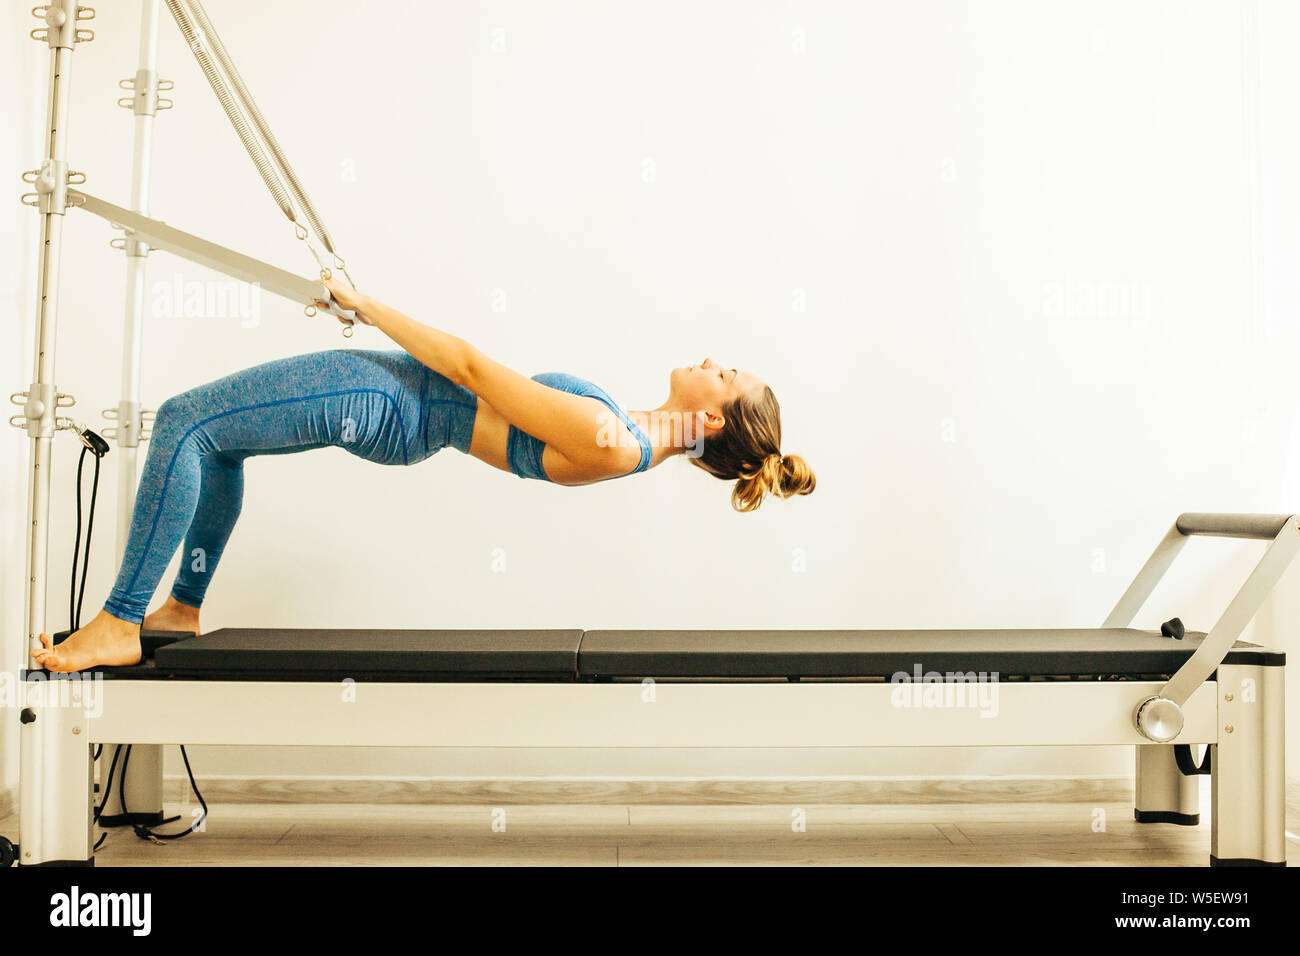 Woman performing Pilates exercise using a Cadillac or Trapeze